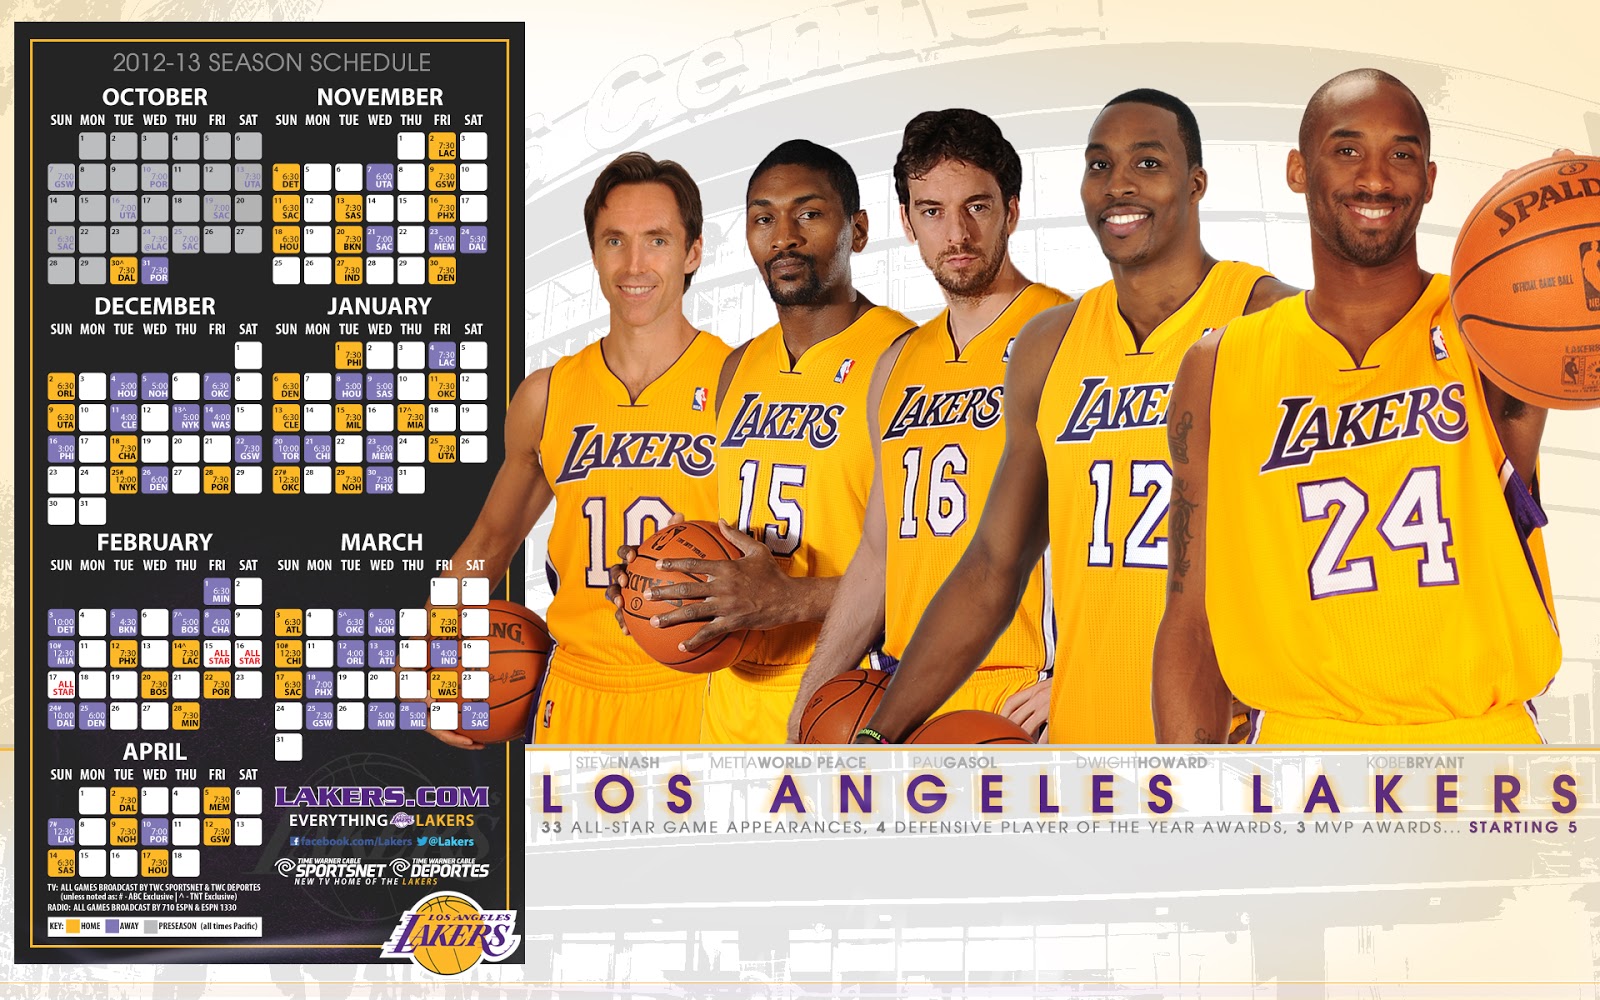 Free Wallpapers of NBA 2012-2013 New Season - Everything about PowerPoint & Wallpapers1600 x 1000